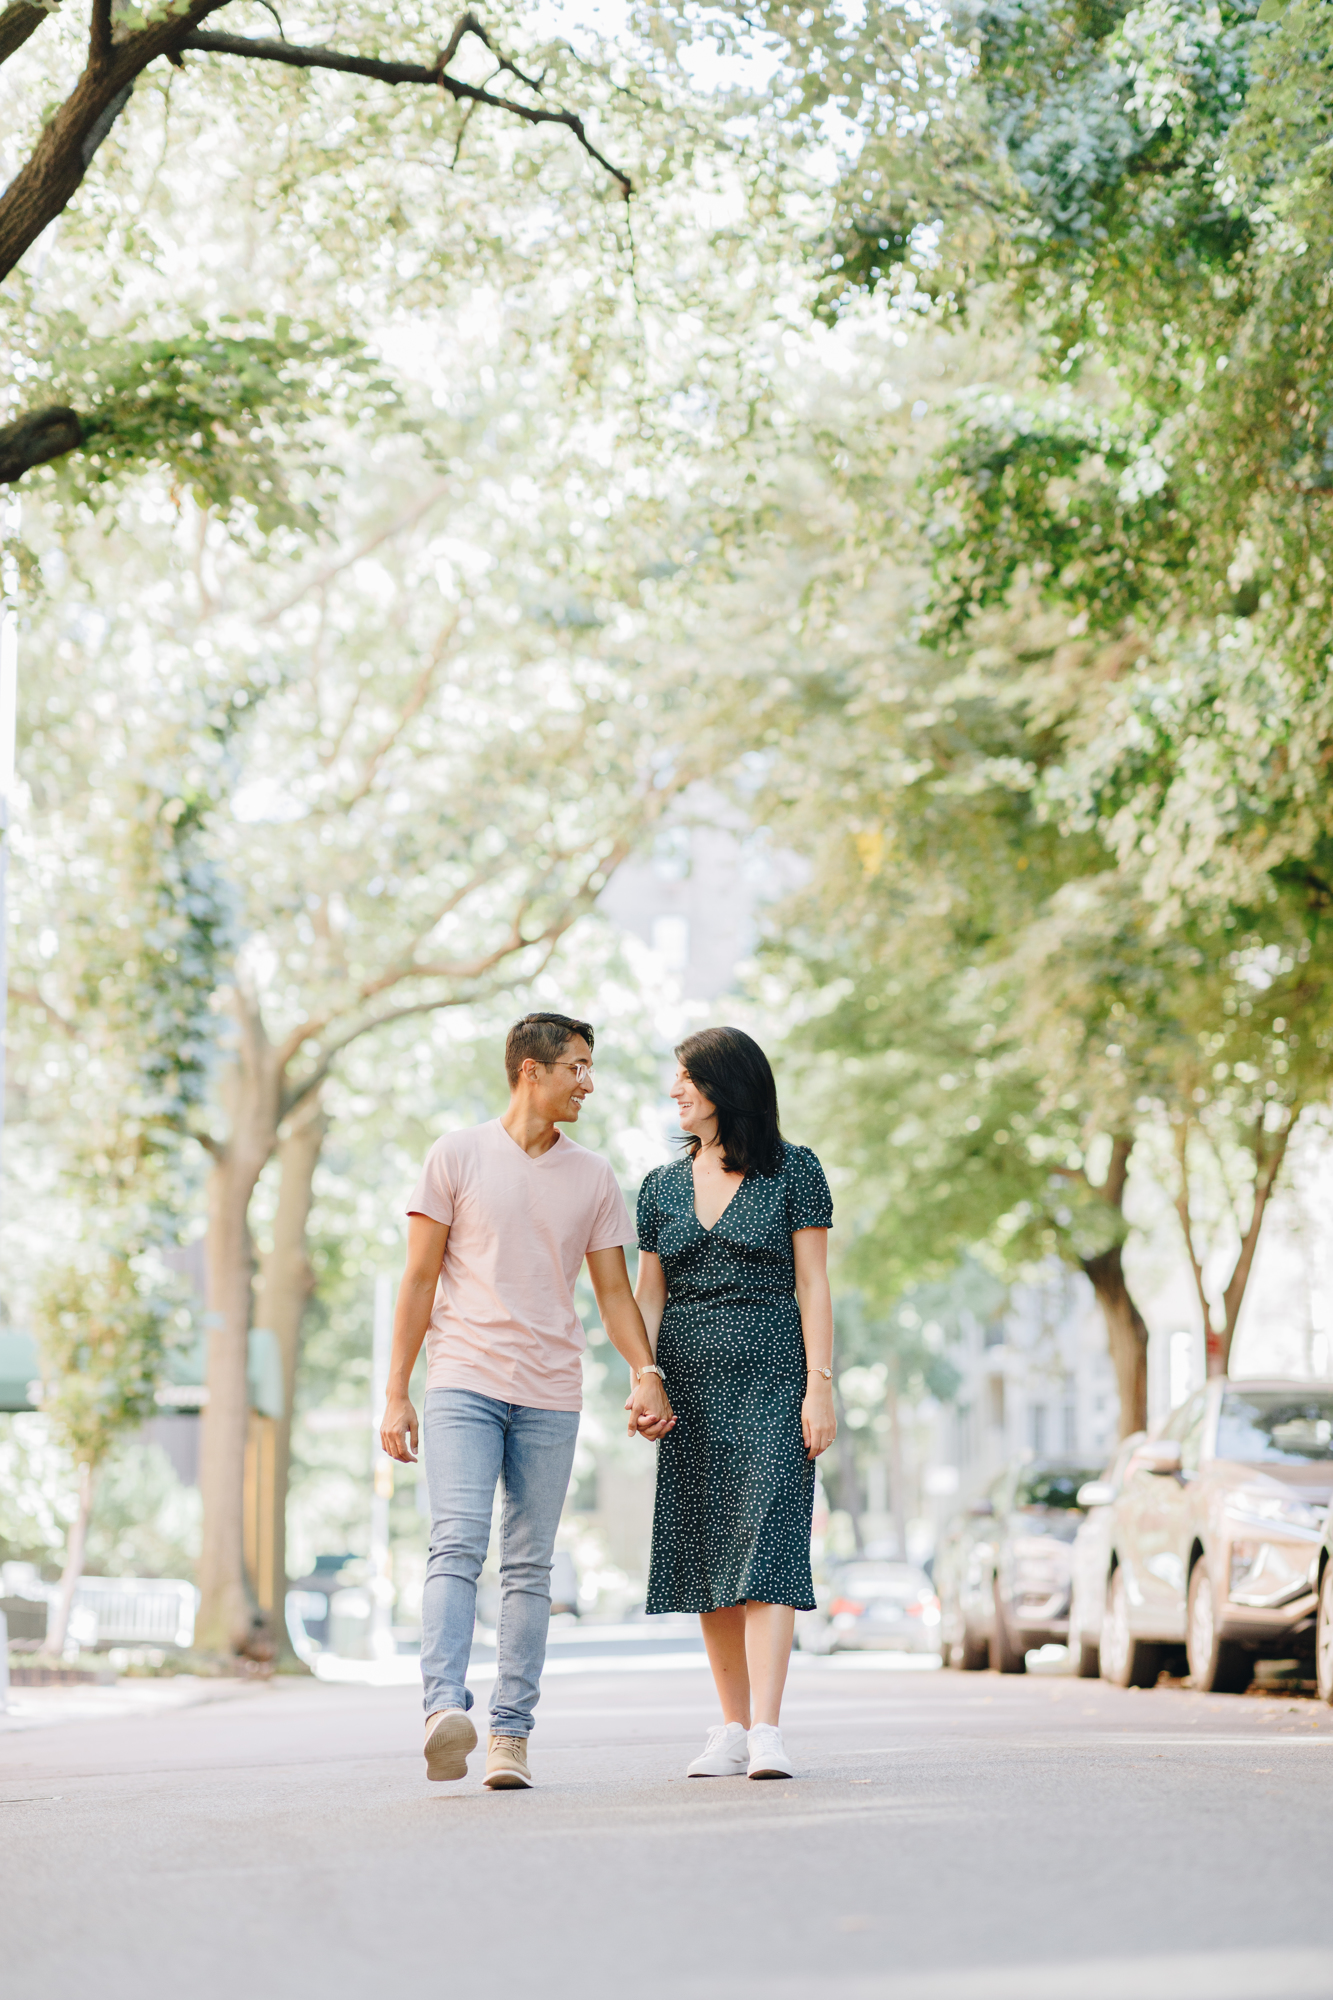 Perfect Brooklyn Heights Promenade Engagement Photos in Summery New York